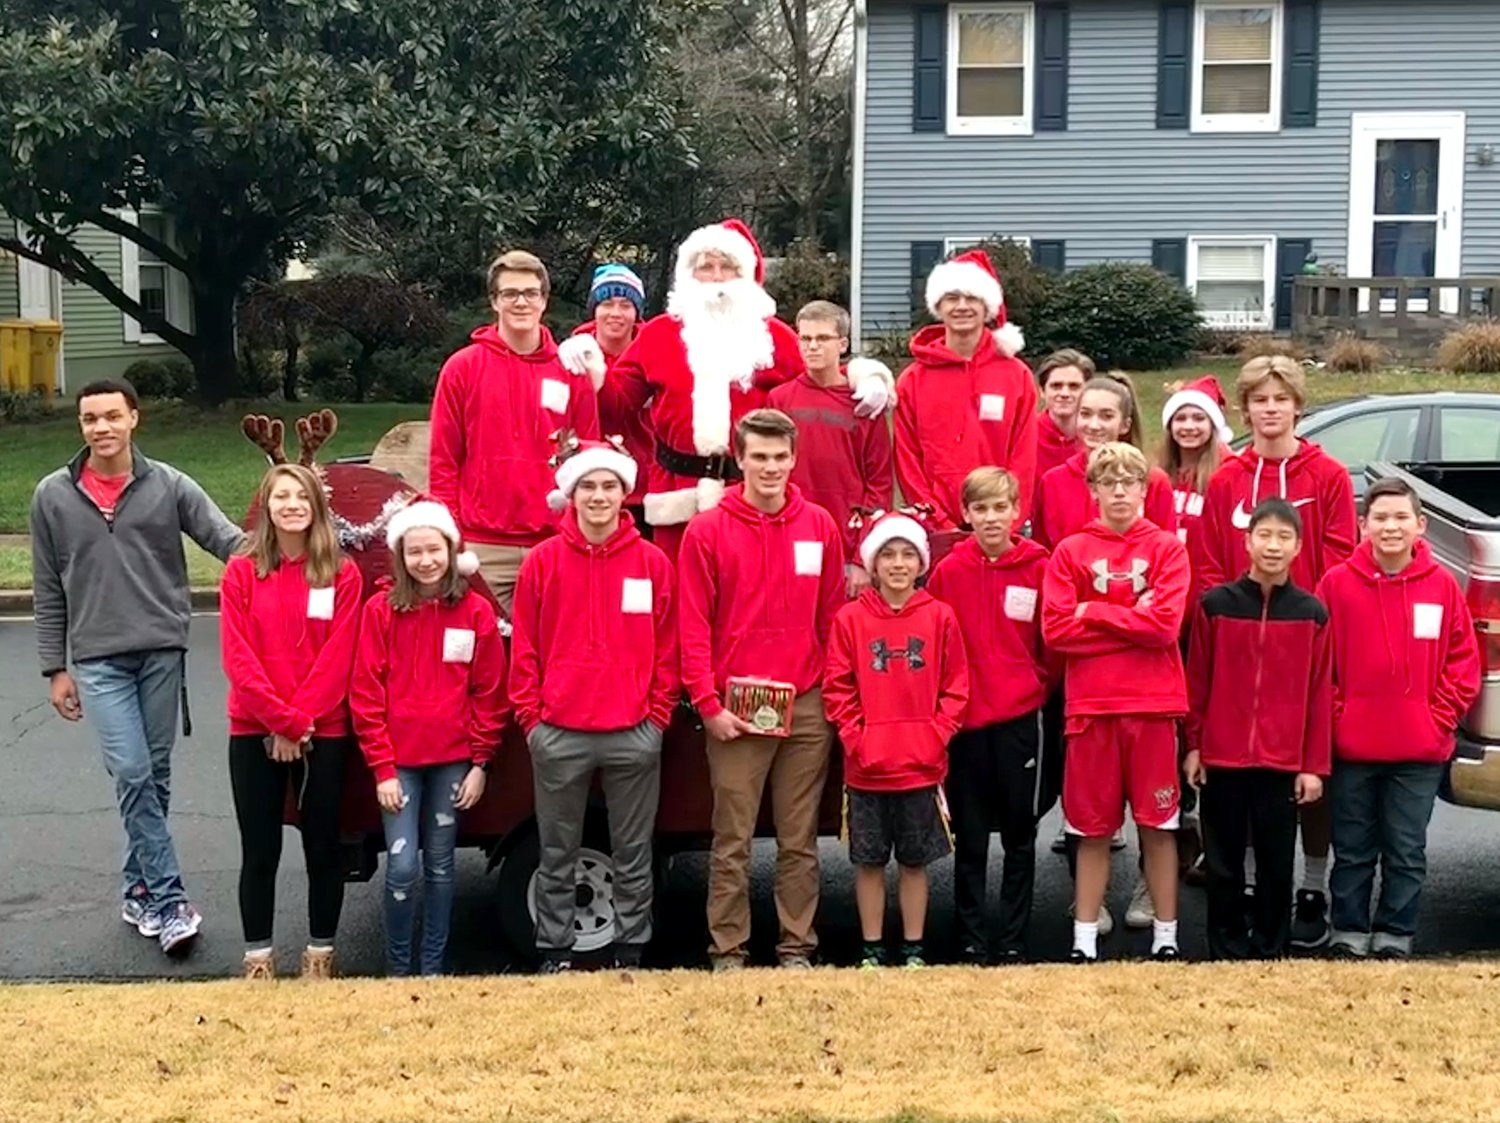 For more than a decade, teens who live near Riverdale Road have gathered toys and nonperishable food to help families in need of Christmas cheer.